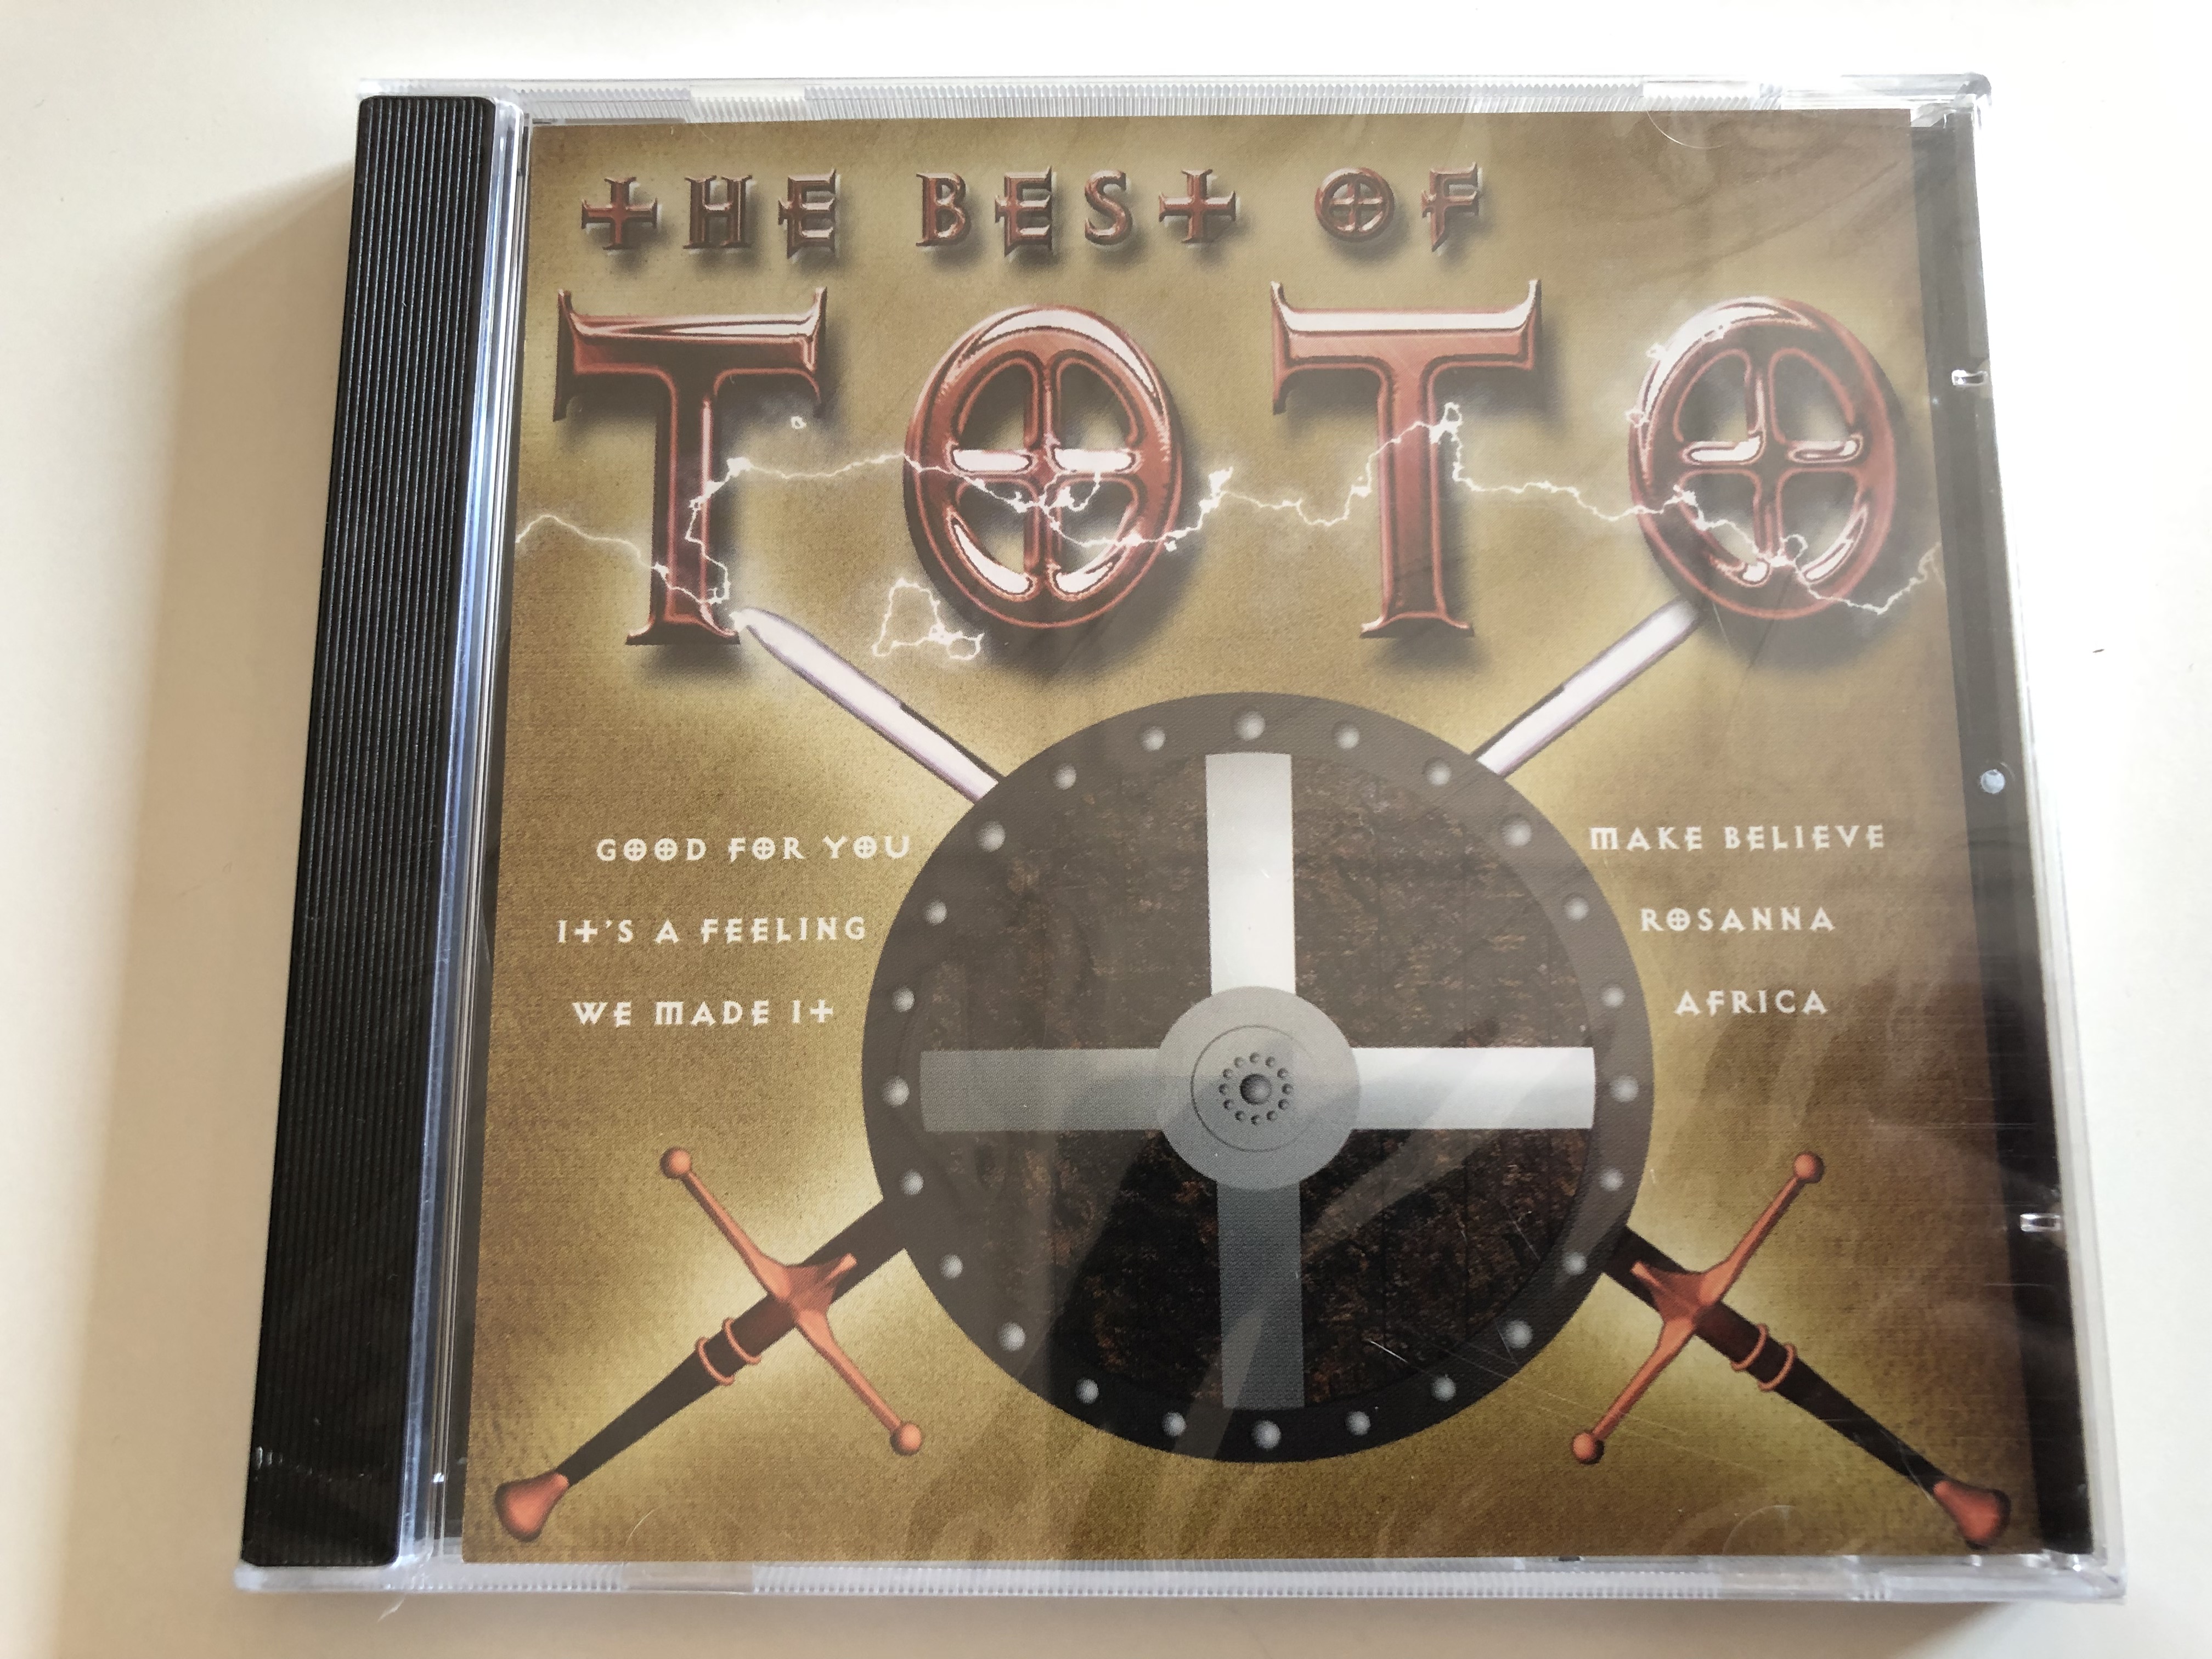 -the-best-of-toto-good-for-you-make-believe-it-s-a-feeling-rosanna-we-made-it-africa-audio-cd-fnm-3715-1-.jpg